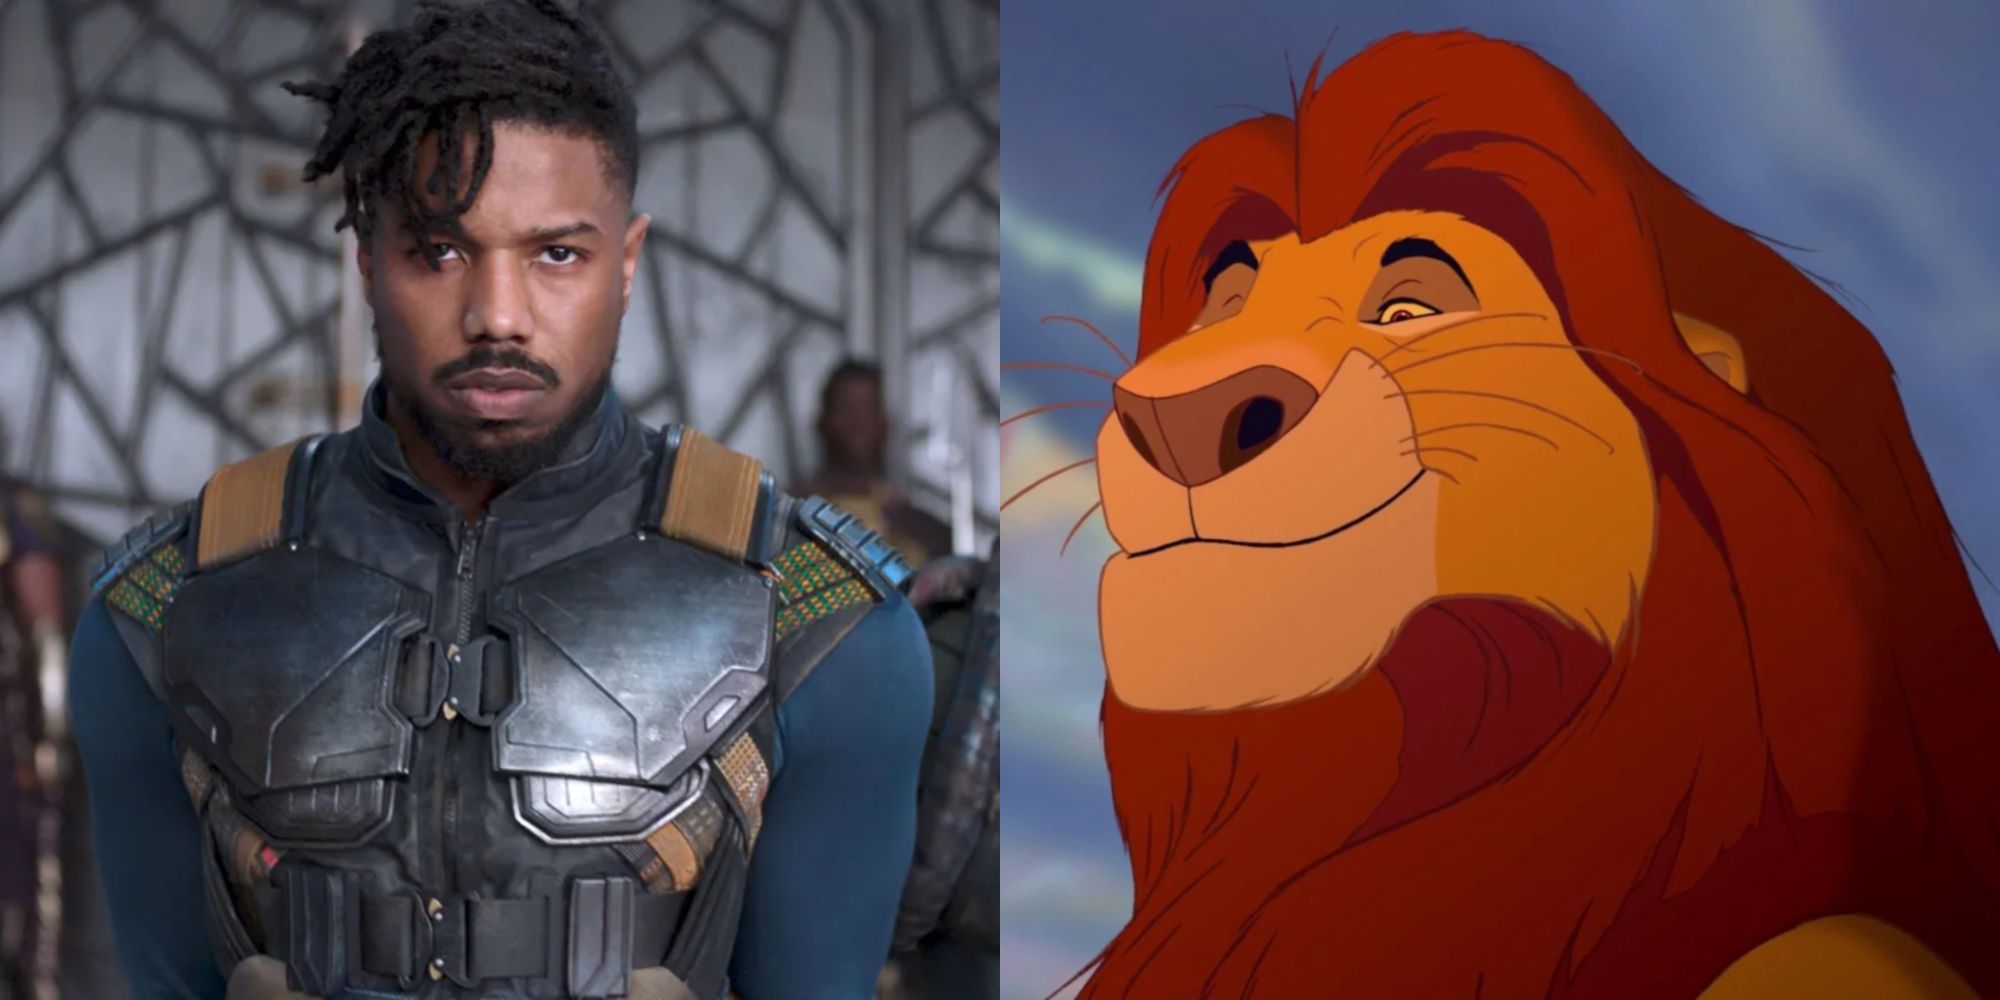 Split image shwoing Killmonger in Black Panther and Mufasa in The Lion King.